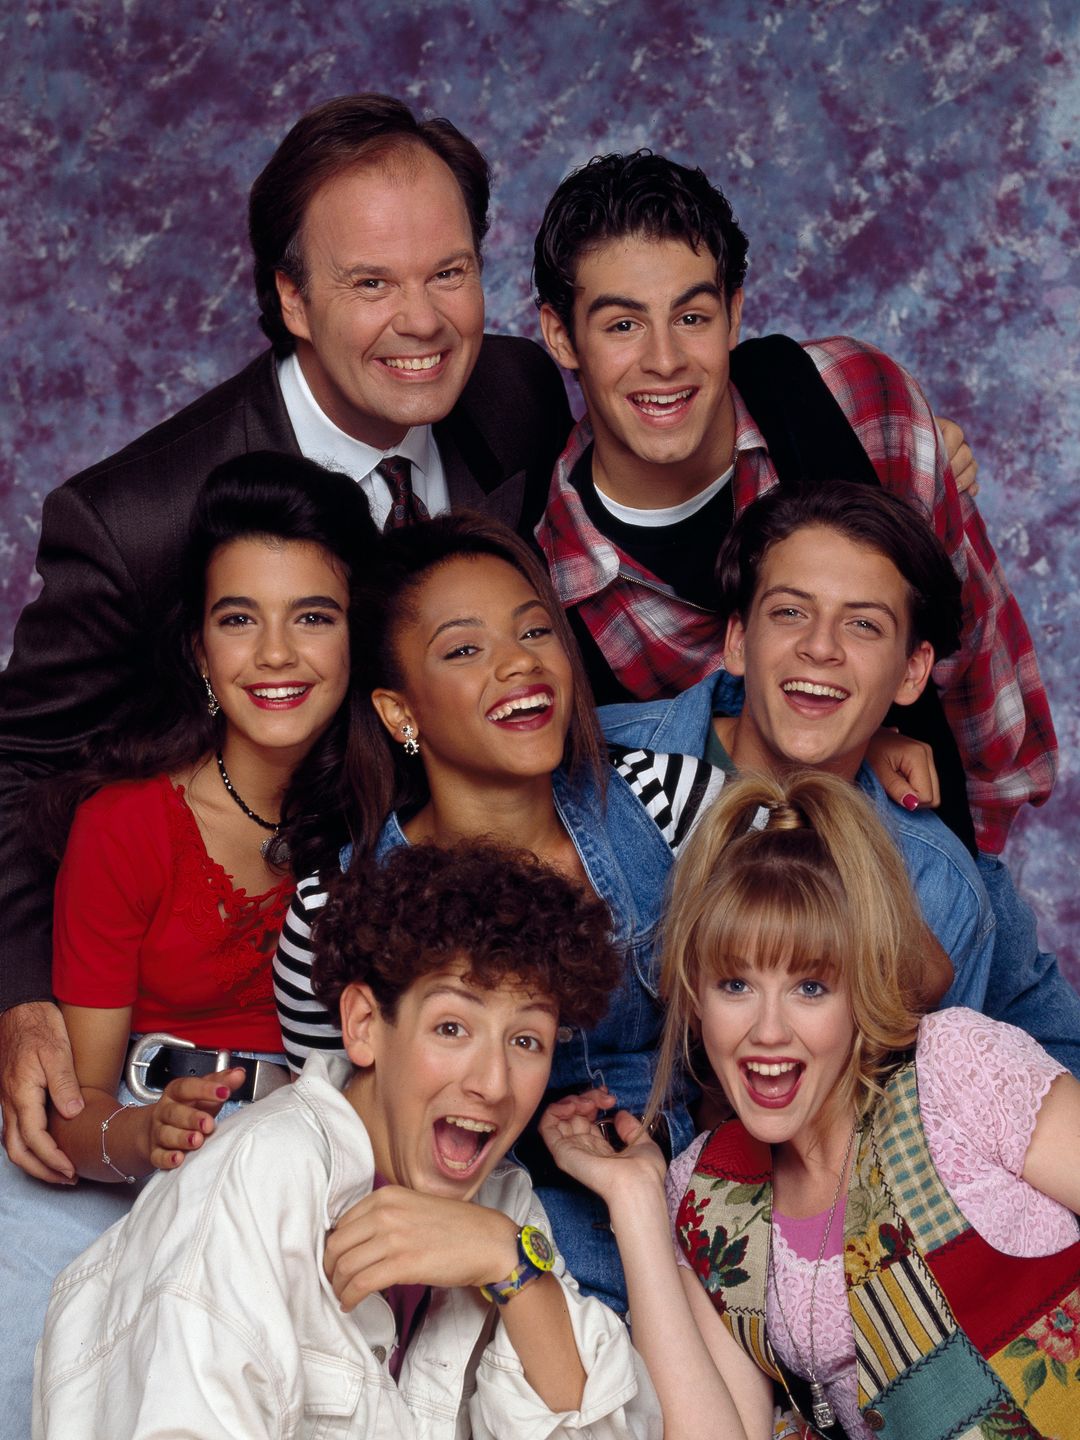 Bianca starred in Saved by the Bell - The New Class